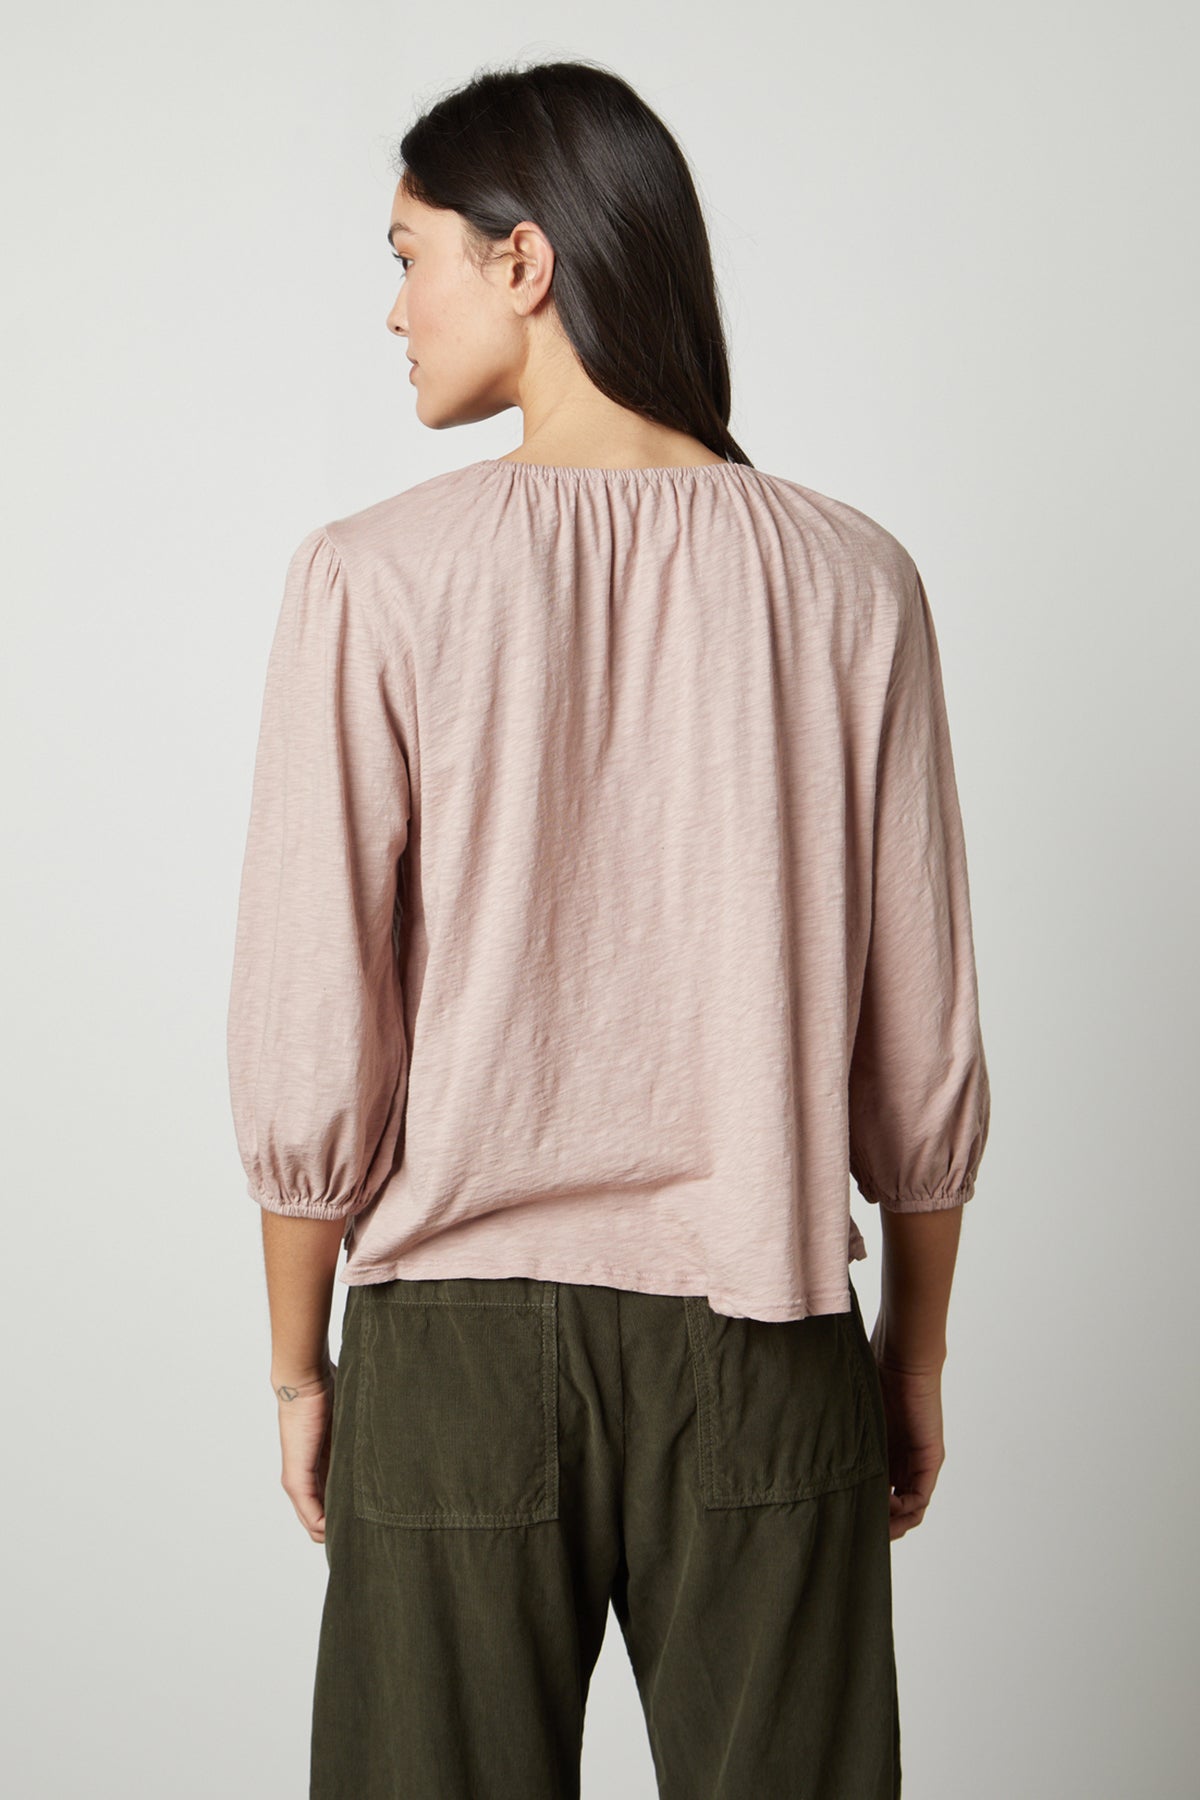 The back view of a woman wearing a Velvet by Graham & Spencer JULIE 3/4 SLEEVE TEE and green pants.-26727740375233